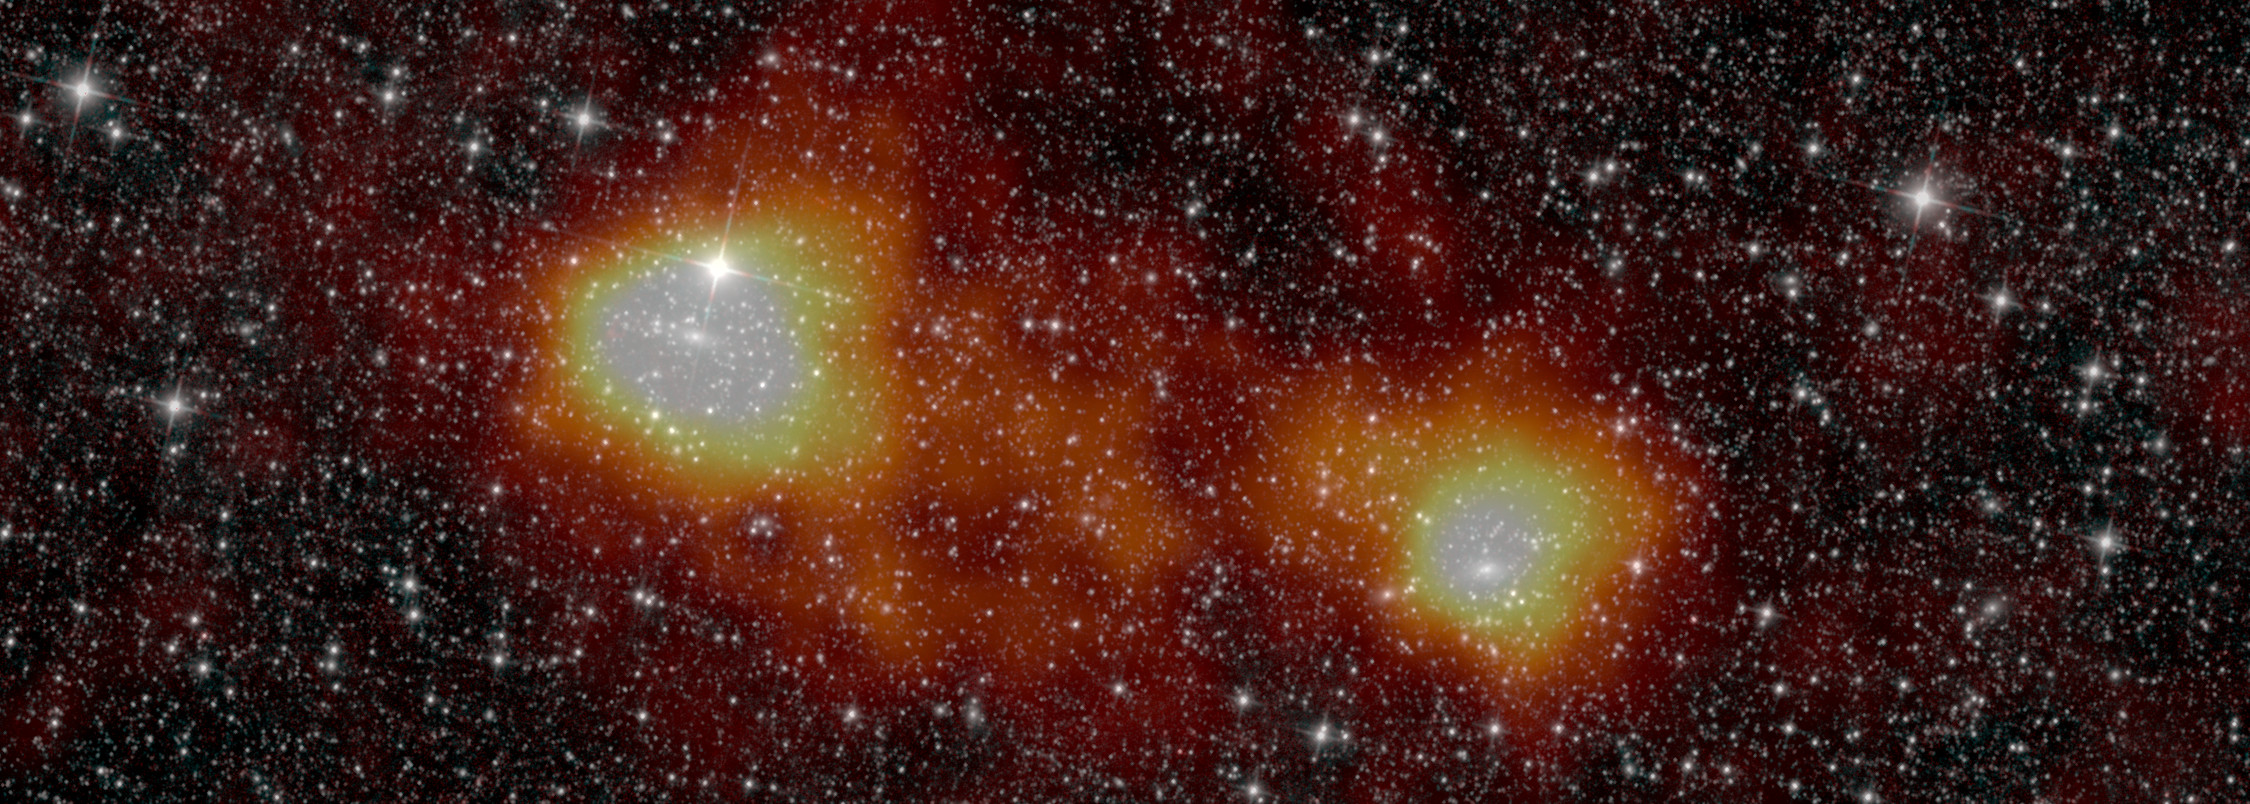 Image of stars and y-map of Abell 399 and Abell 401